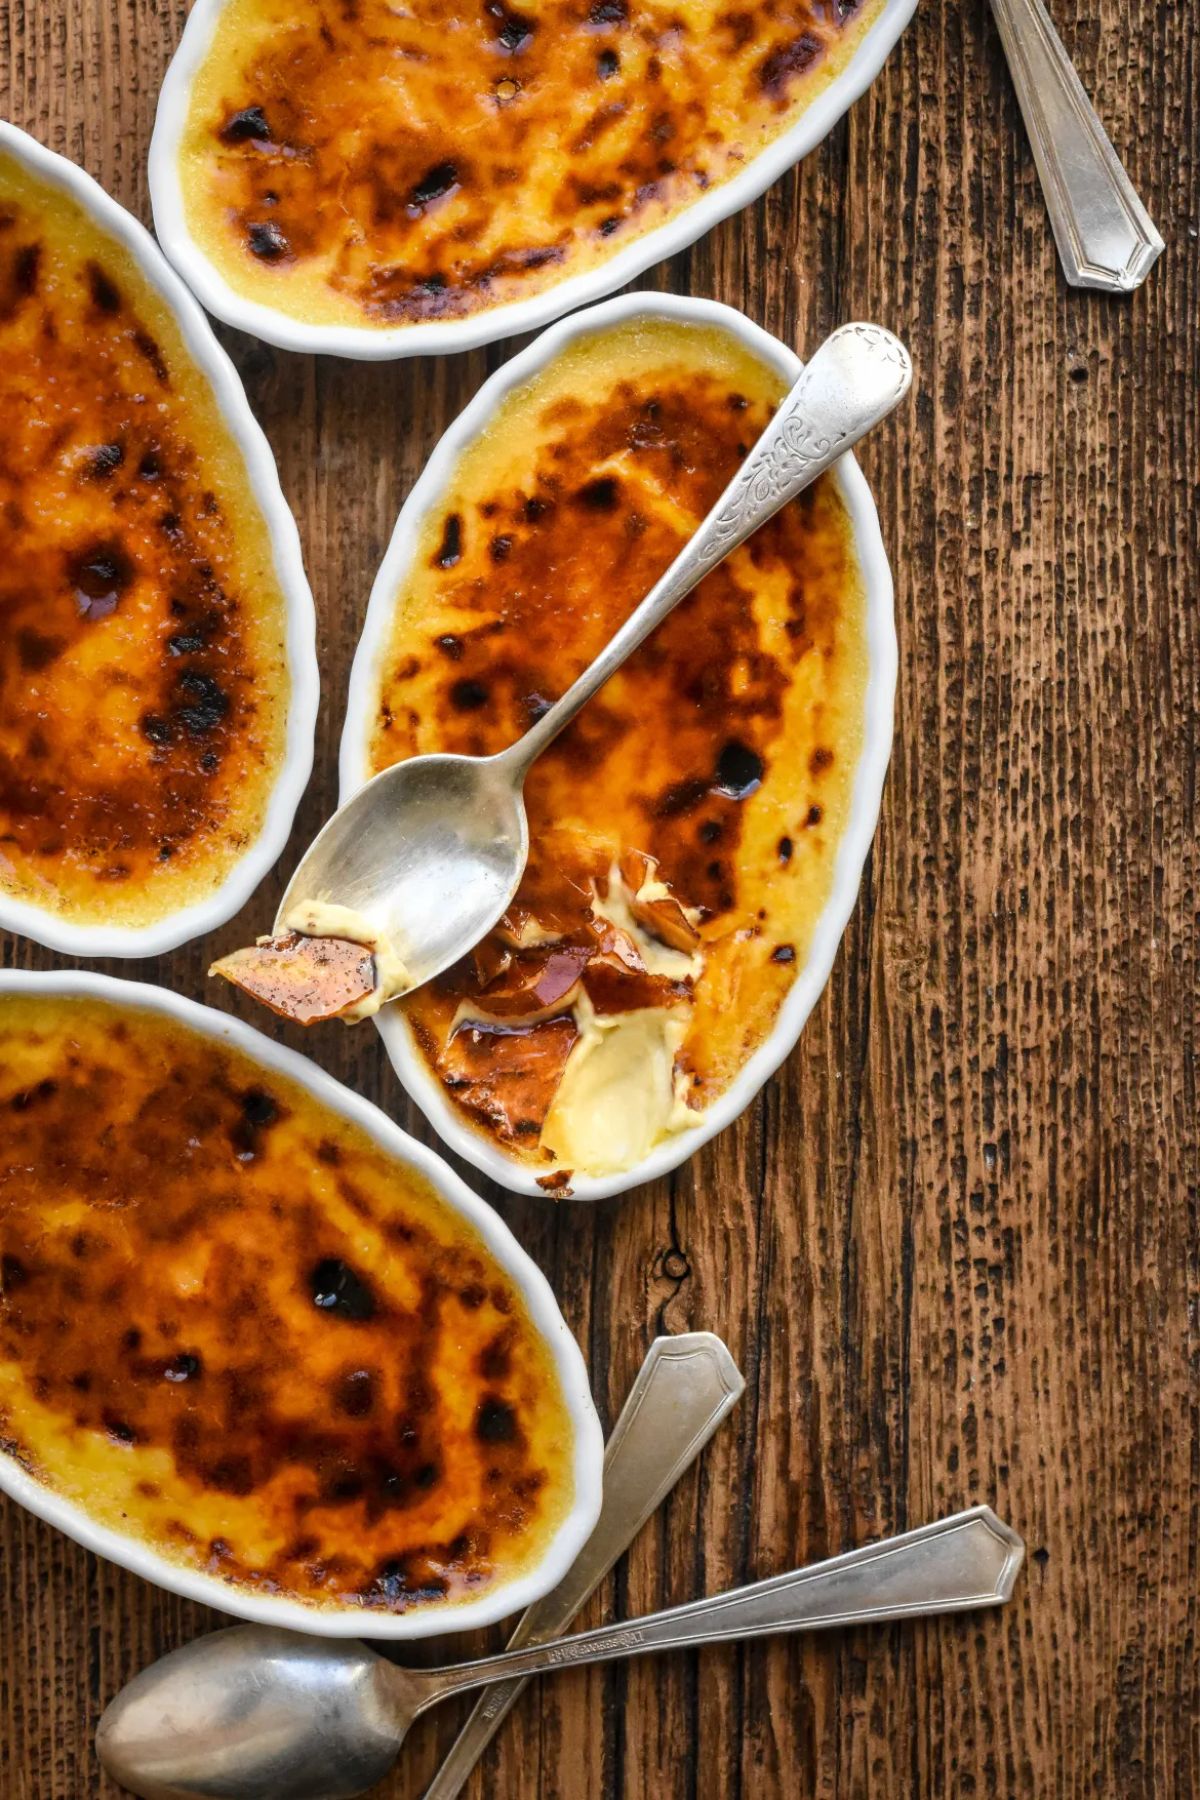 Classic French Creme Brulee in small bowls with spoons on a wooden table.